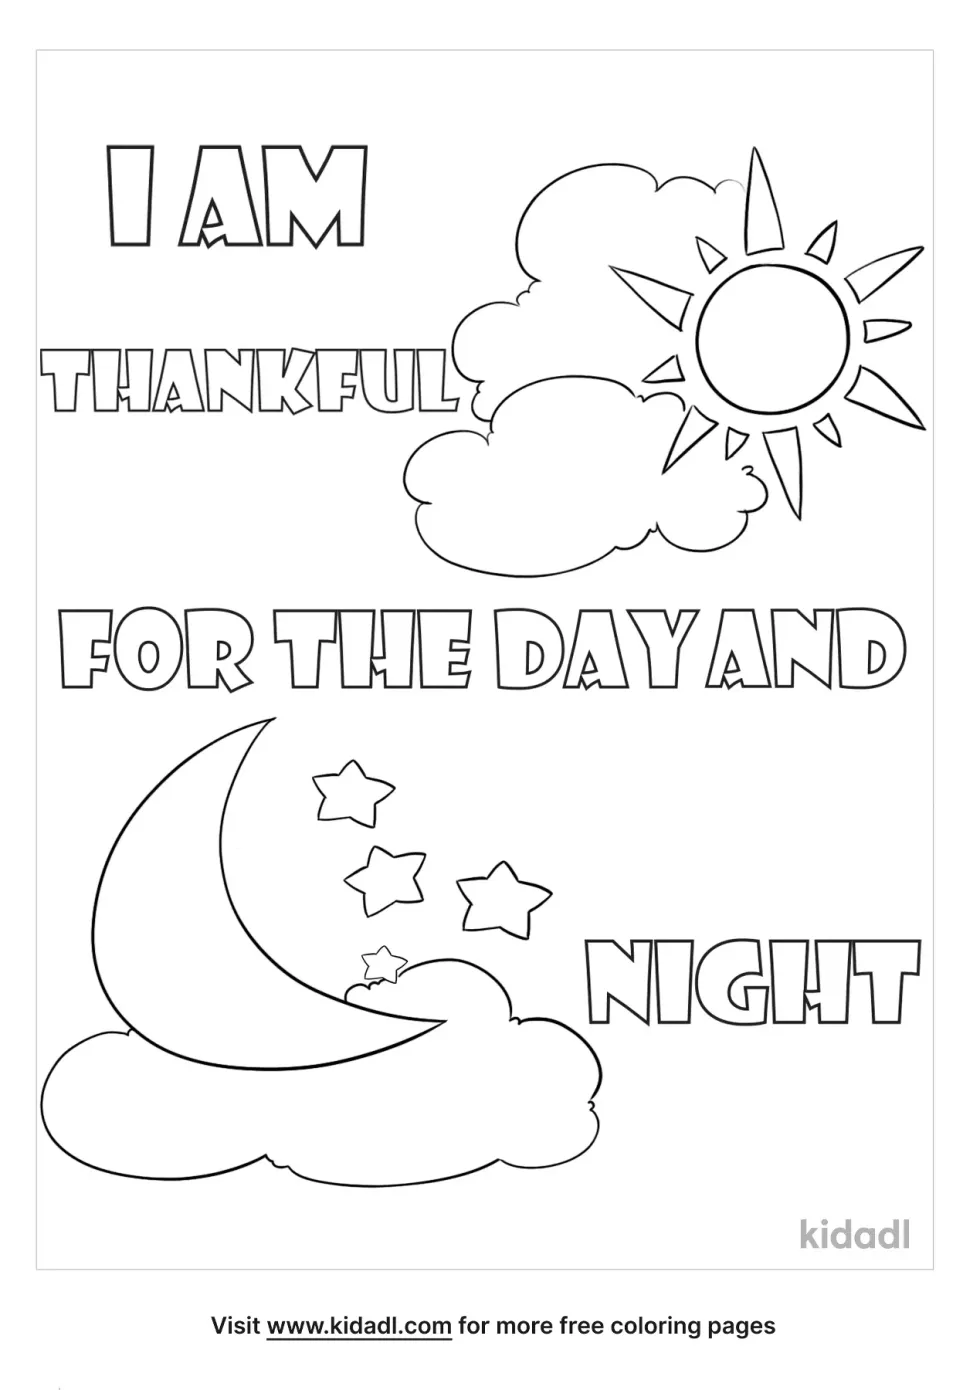 I Am Thankful For The Day And Night